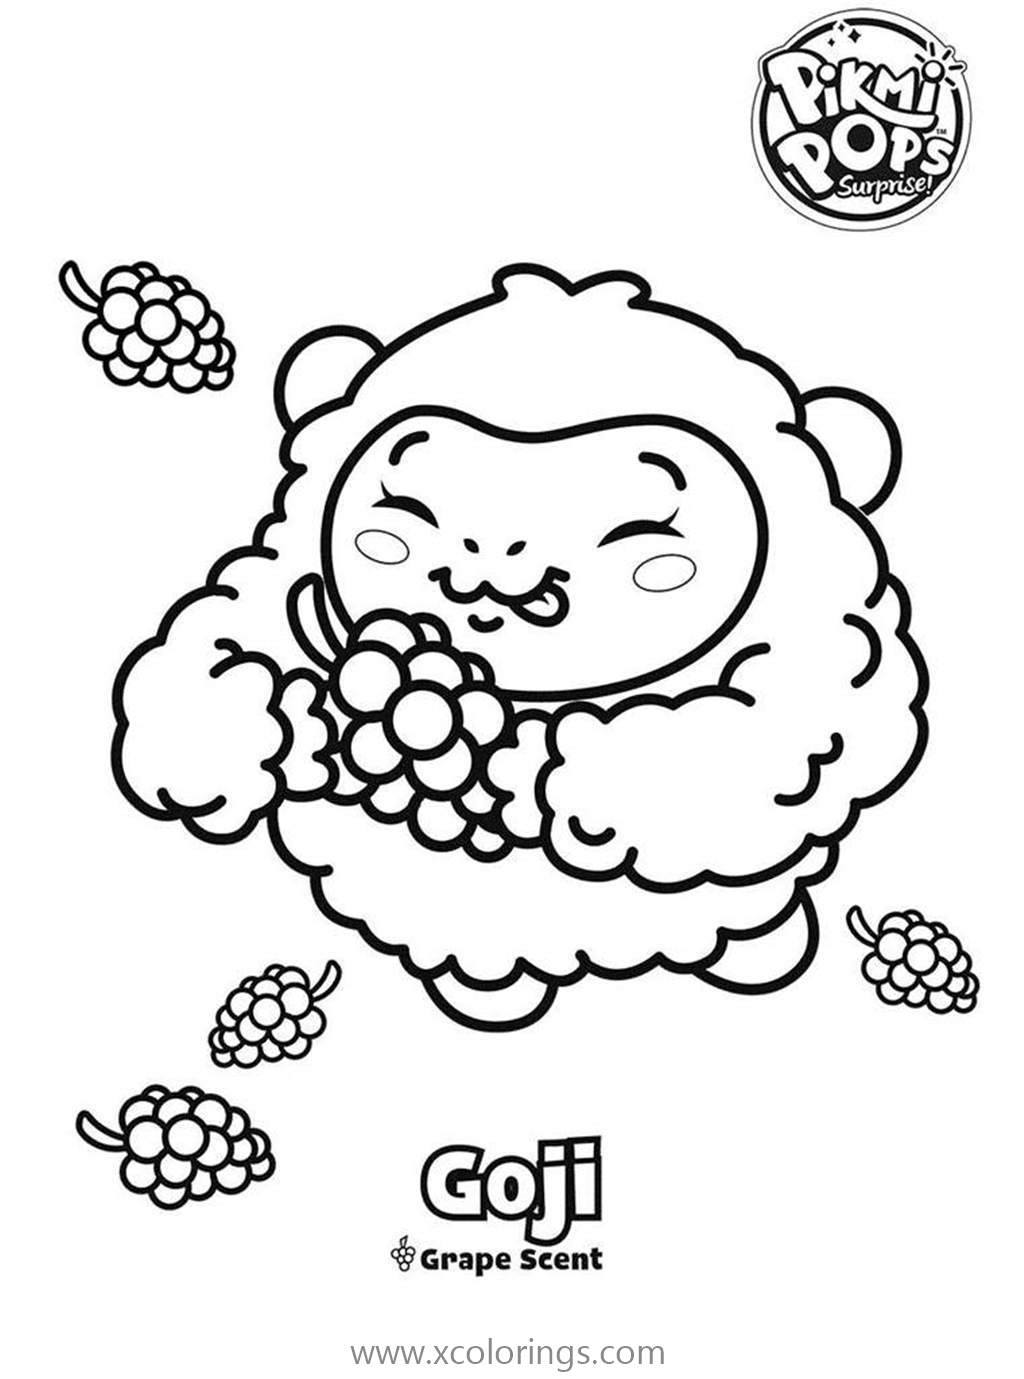 Free Pikmi Pops Goji Coloring Pages printable